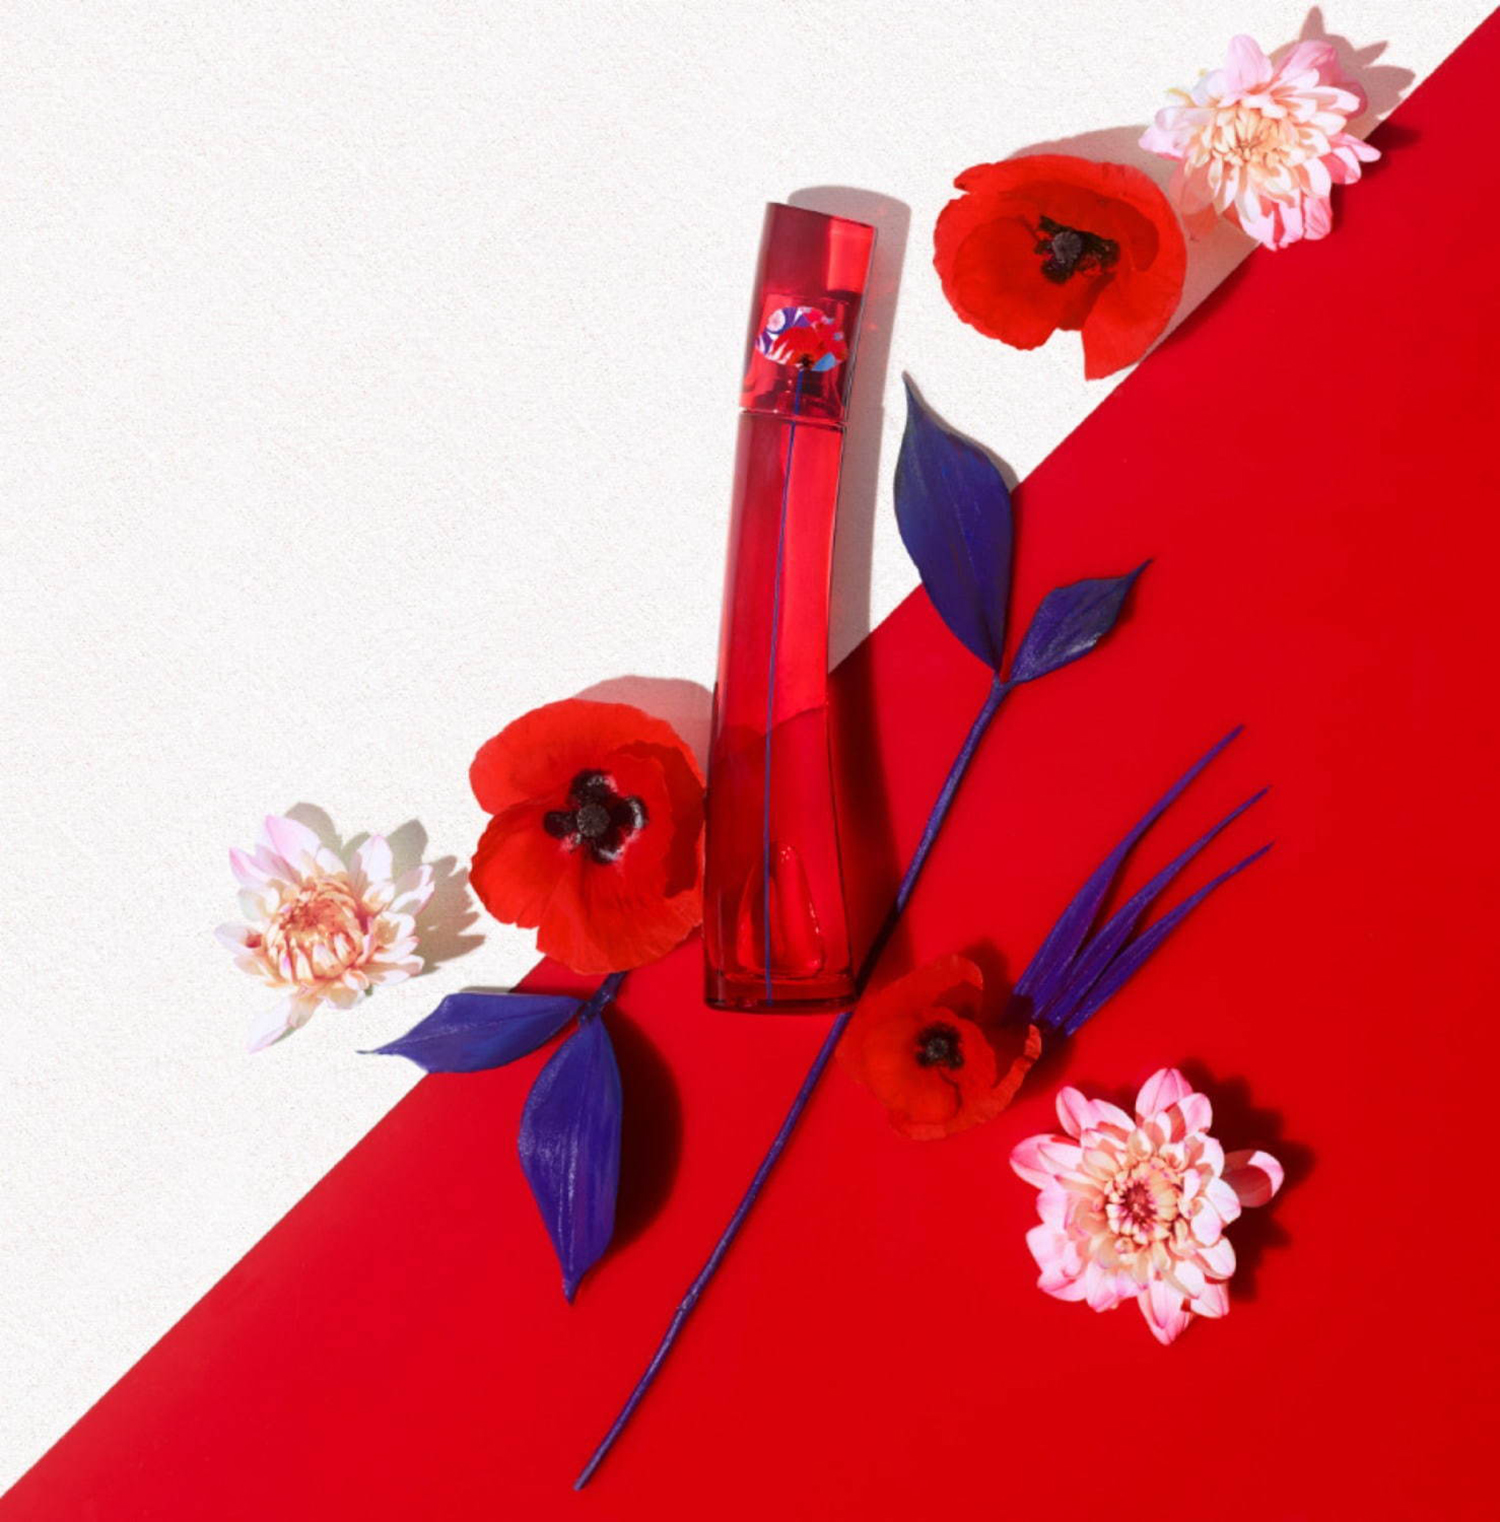 Flower by Kenzo 20th Anniversary Edition